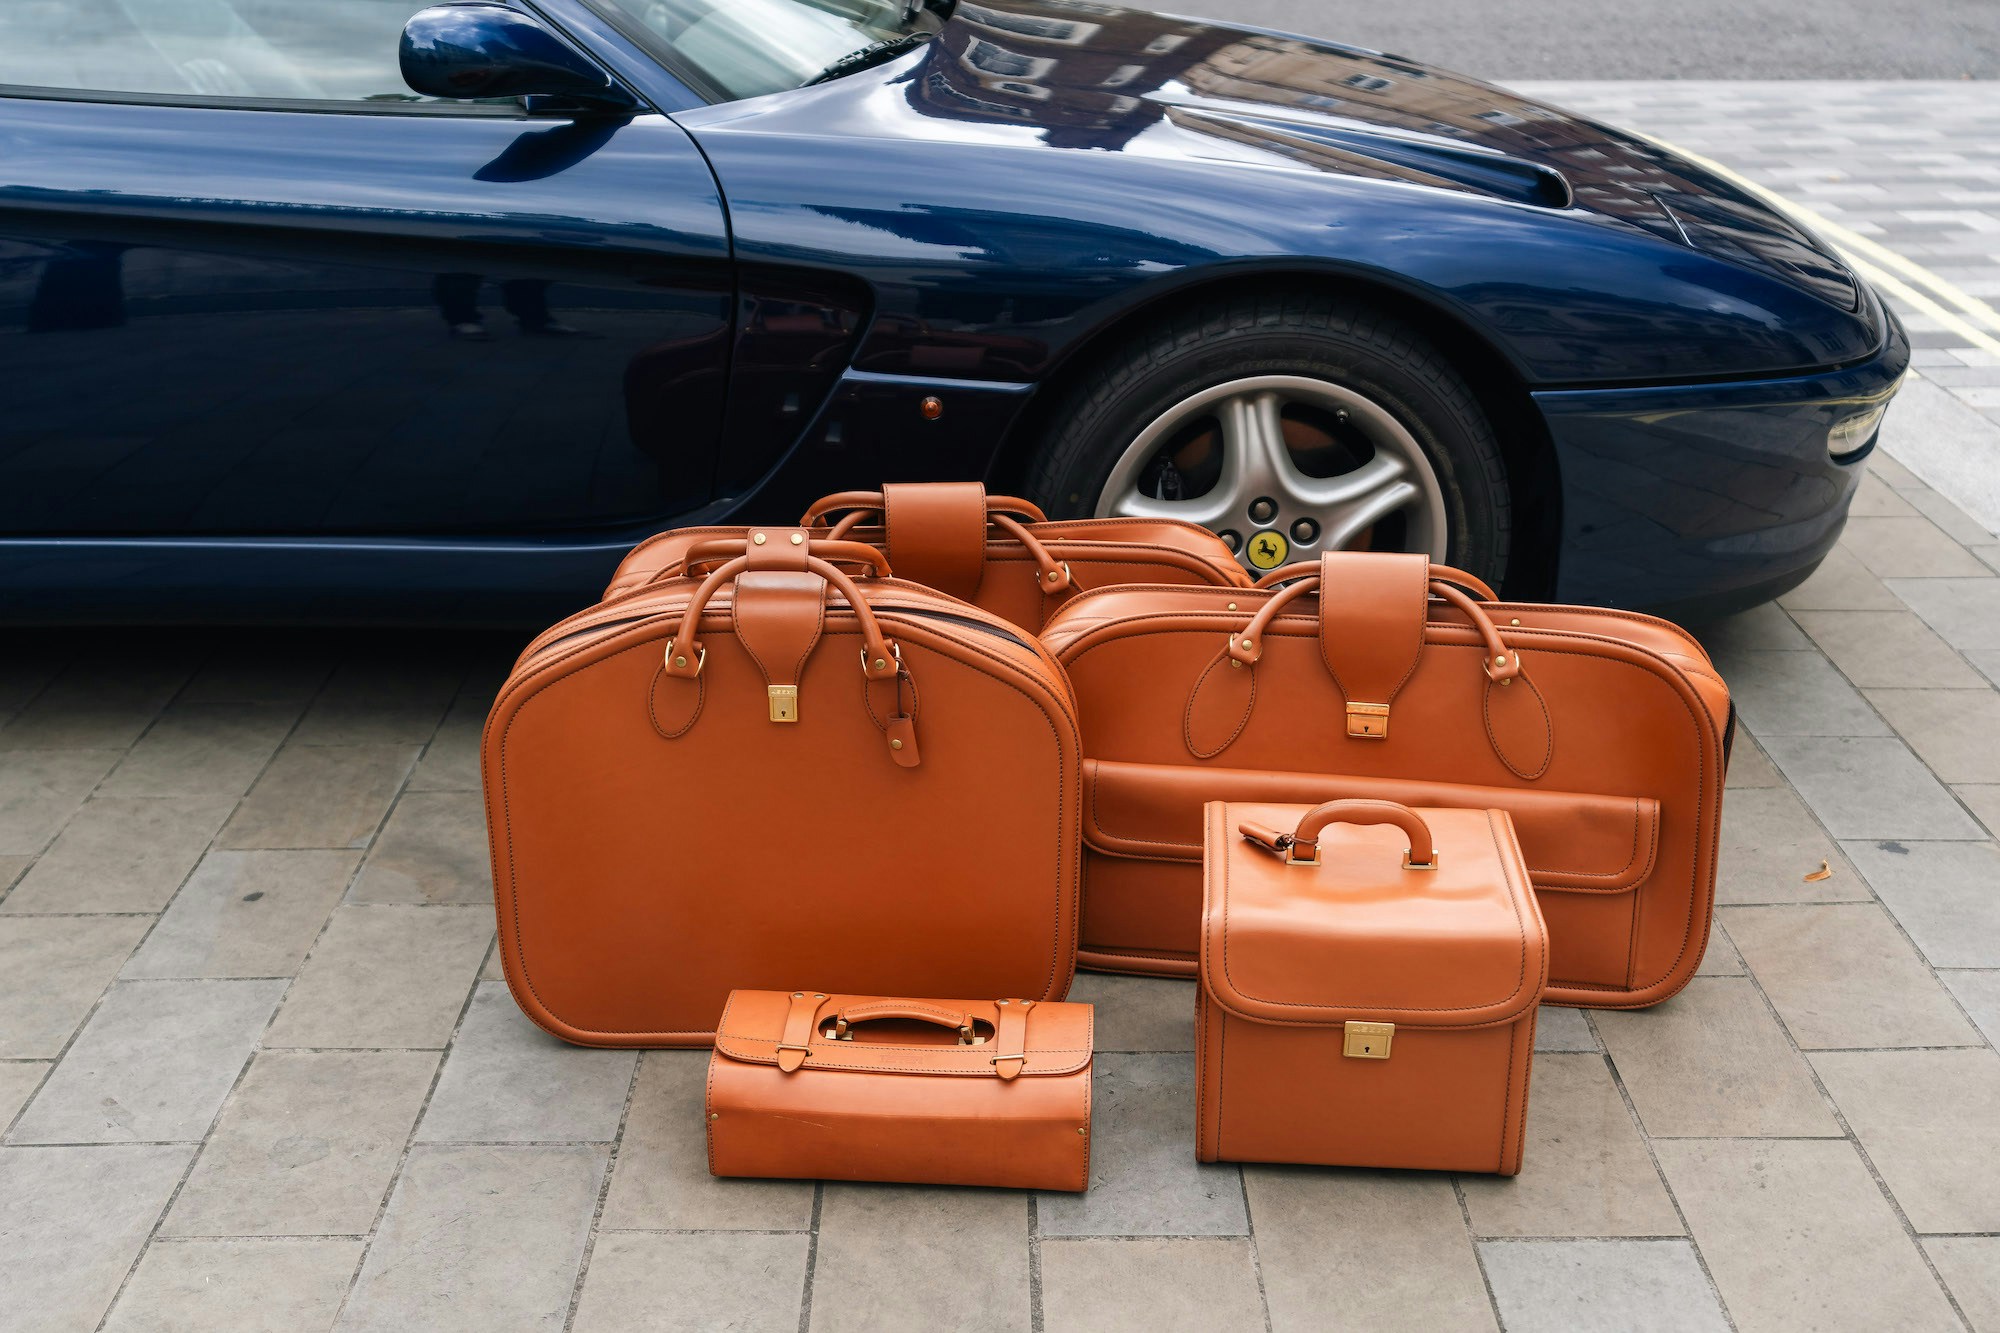 Schedoni Luggage For Ferrari 456 & Tool Kit for sale by auction in London,  United Kingdom